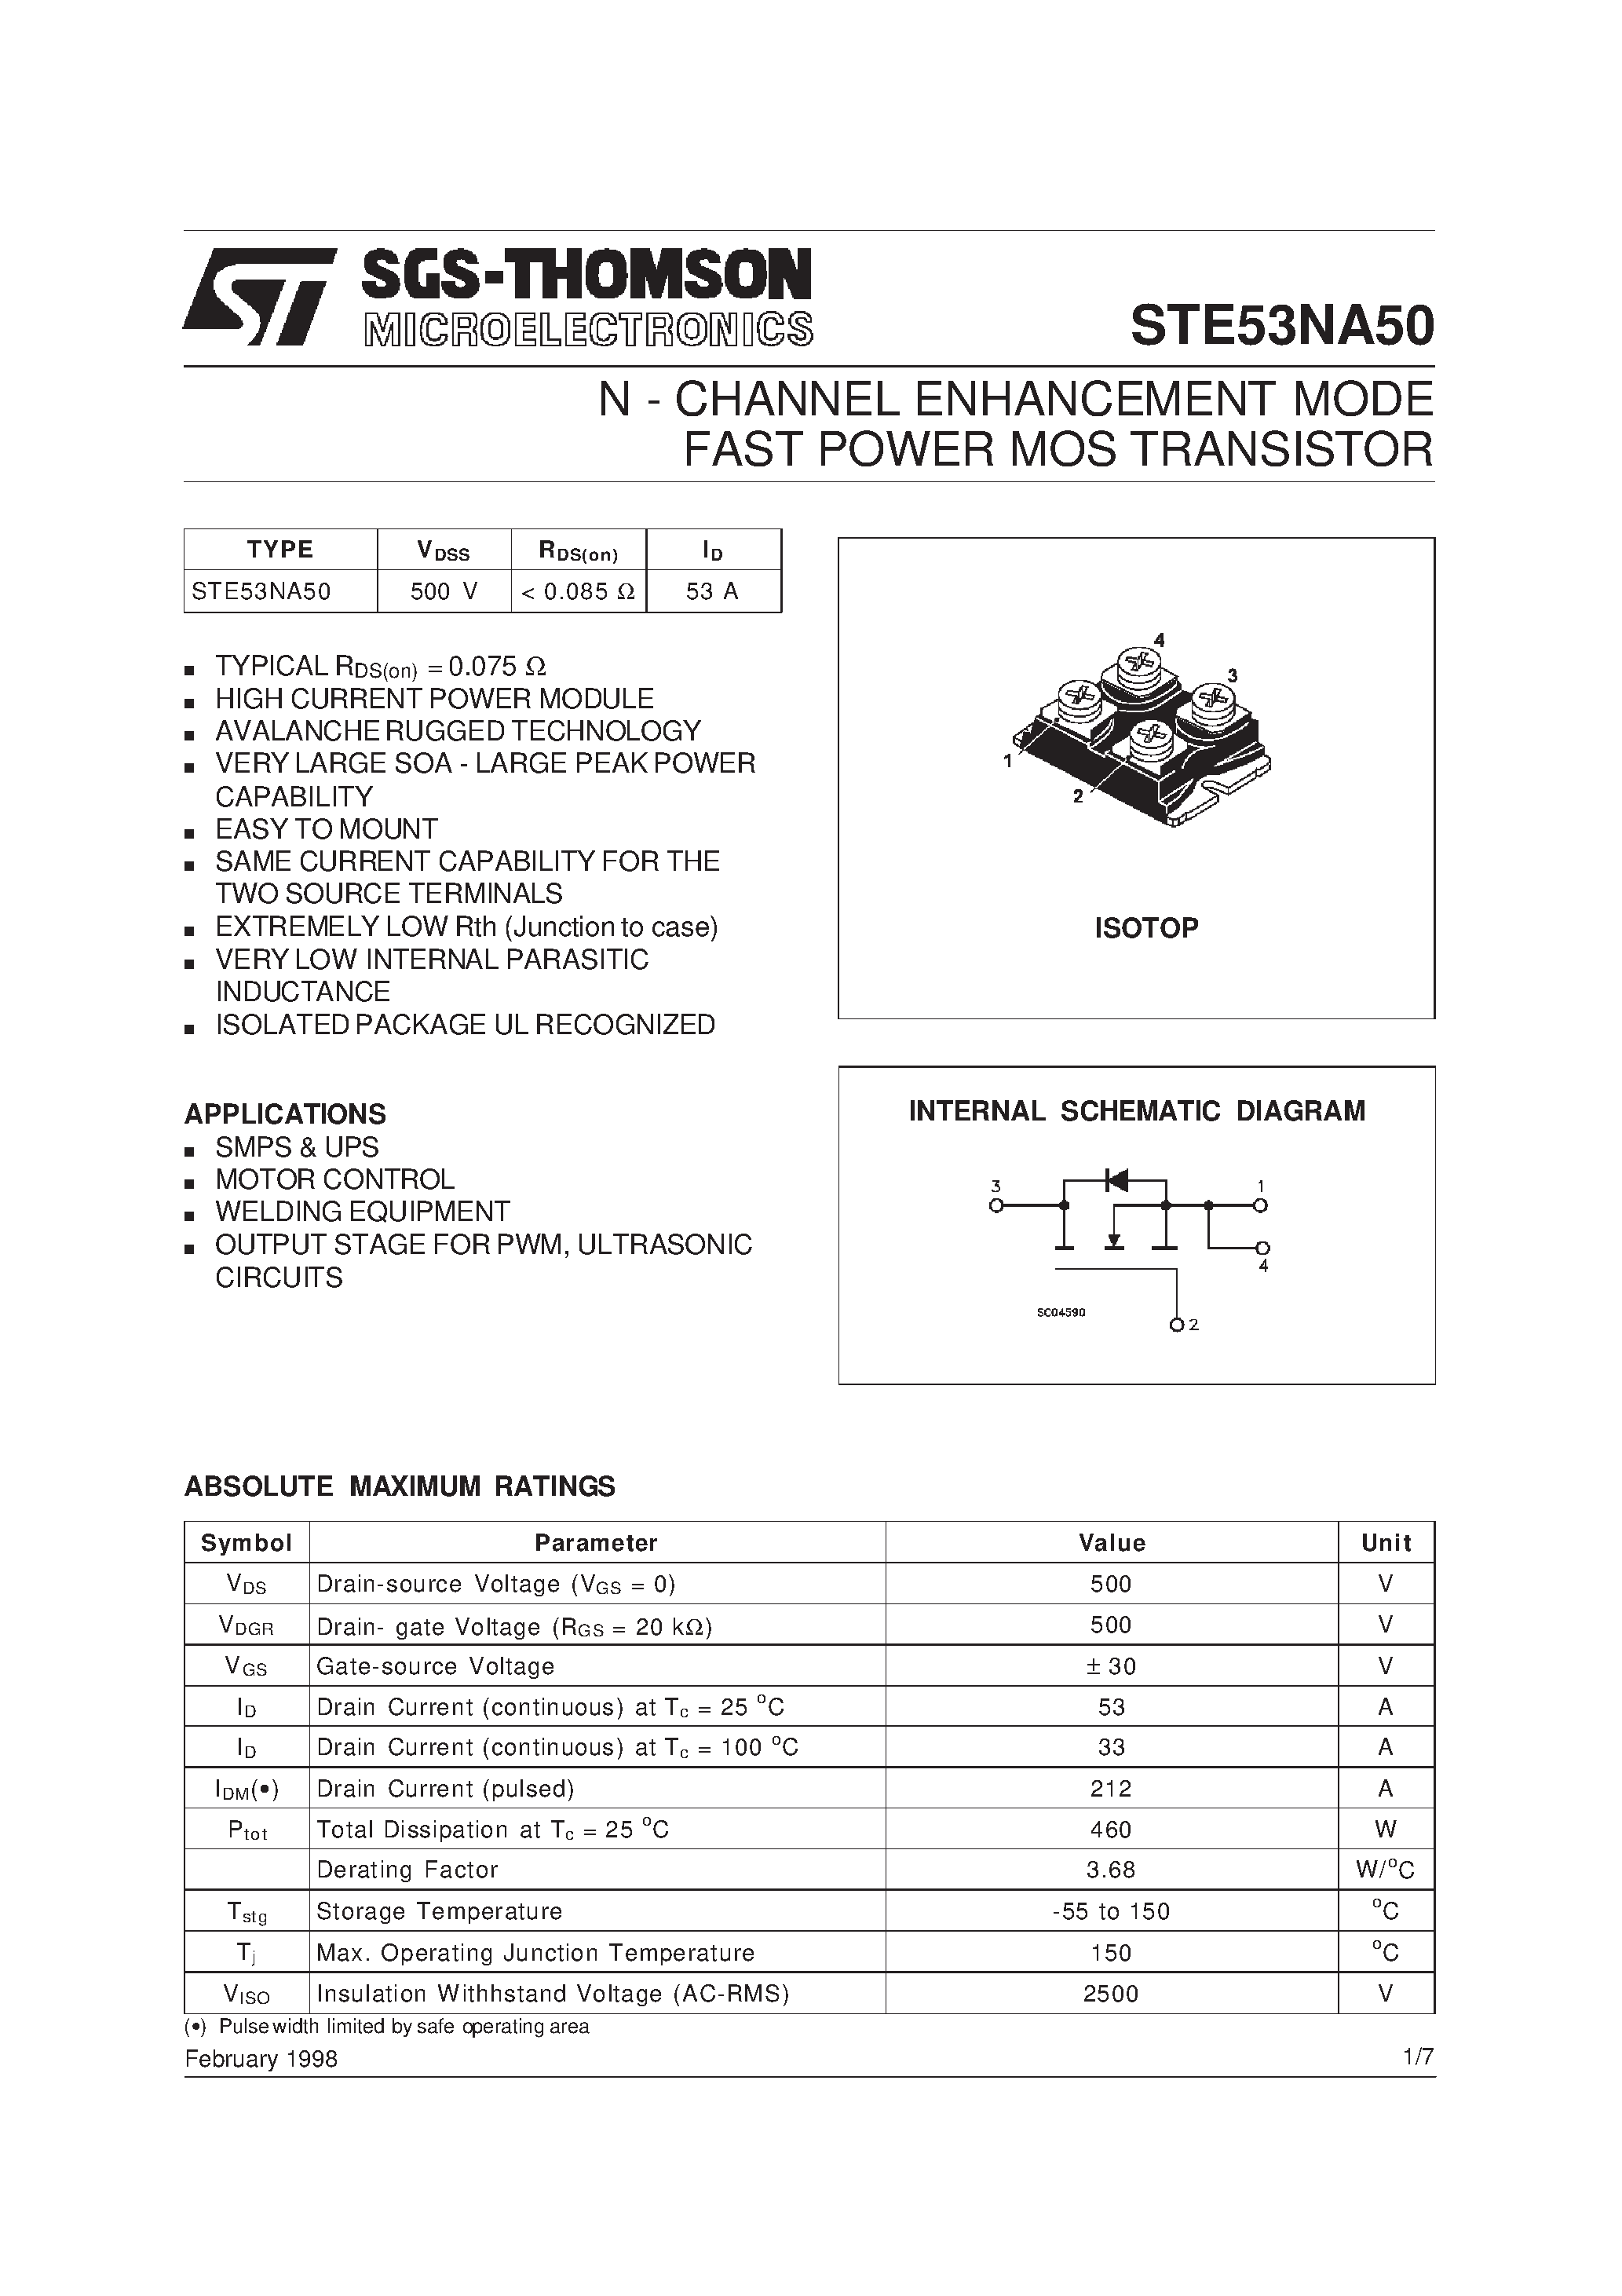 Datasheet STE53NA50 - N - CHANNEL ENHANCEMENT MODE FAST POWER MOS TRANSISTOR page 1